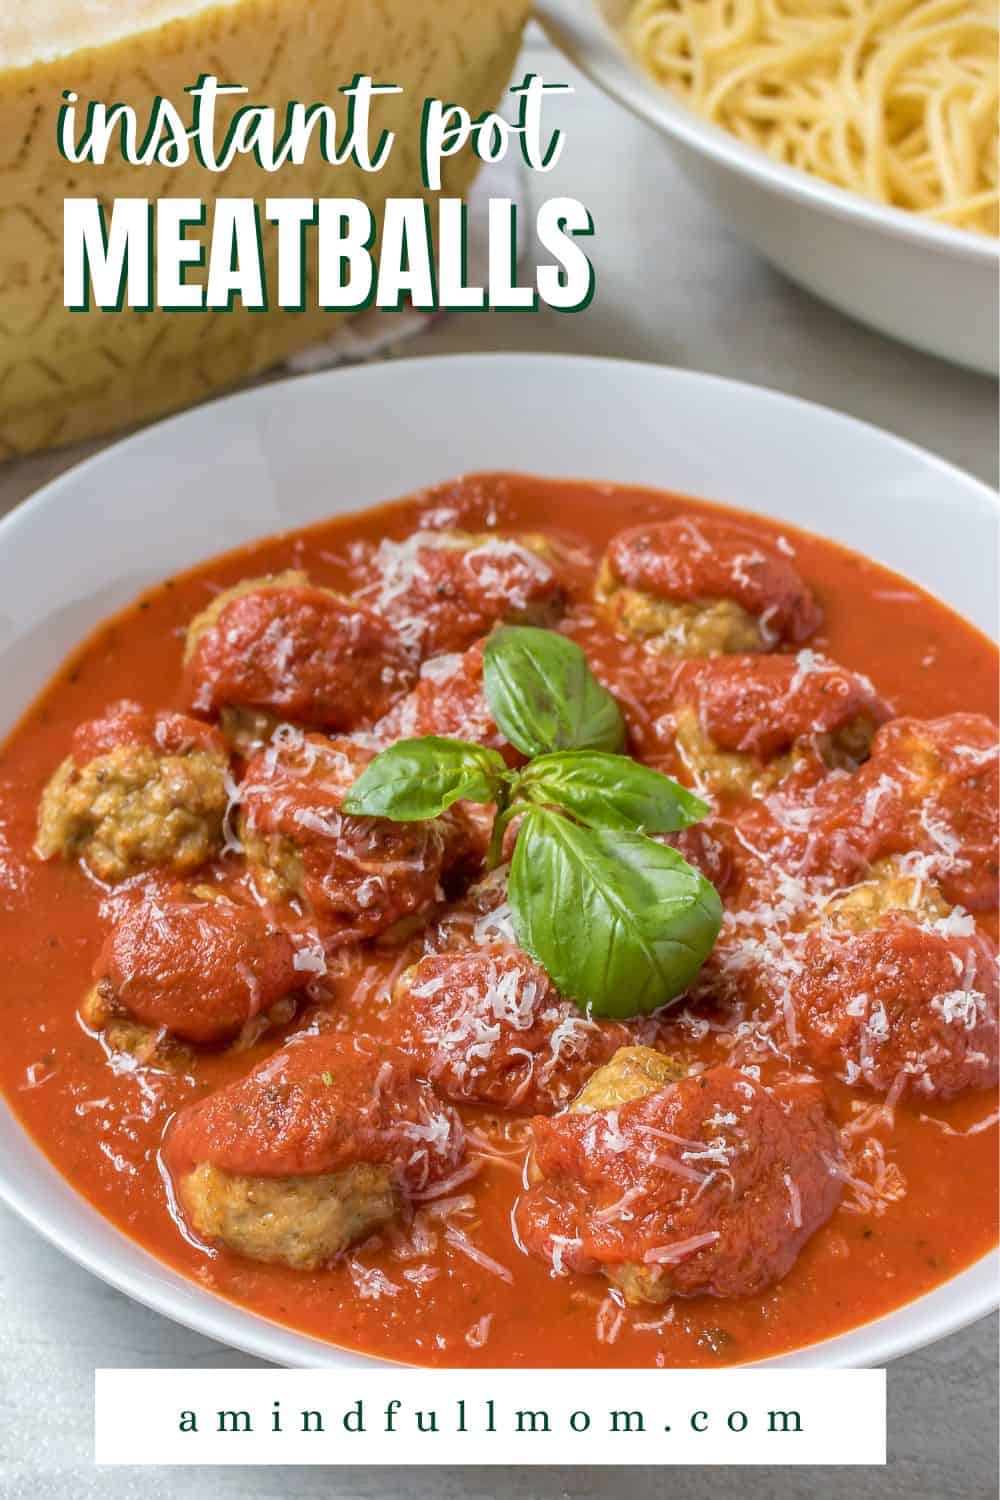 This is the BEST recipe for Instant Pot Meatballs! These Italian style meatballs are full of incredible flavor and are the most tender meatballs you have ever had! They nearly melt in your mouth! Say hello to your new favorite easy meatball recipe!